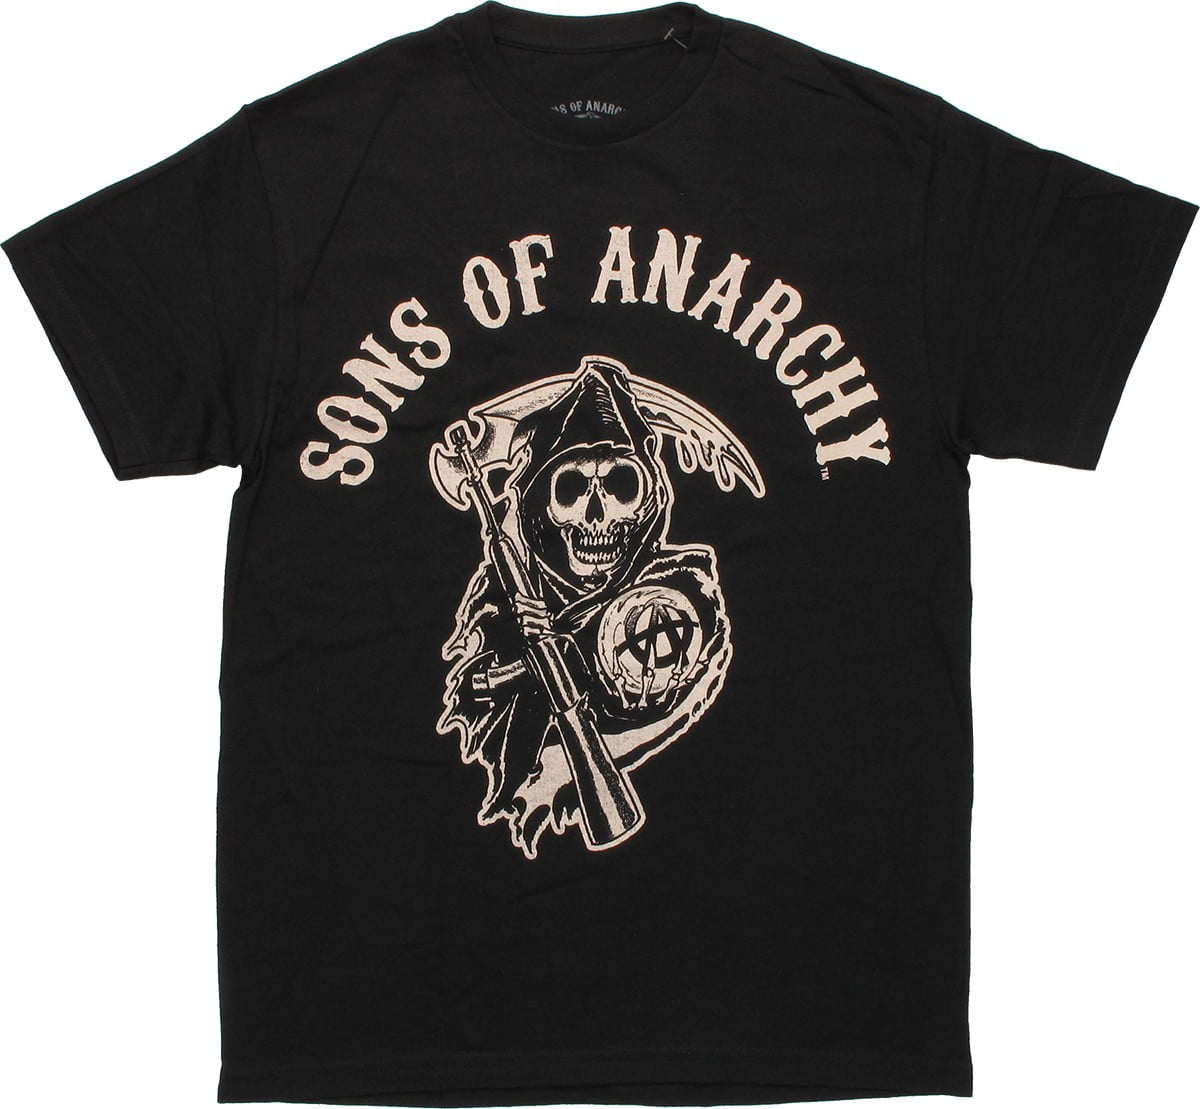 Reaper Anarchy of Sons Shirt T Black Logo